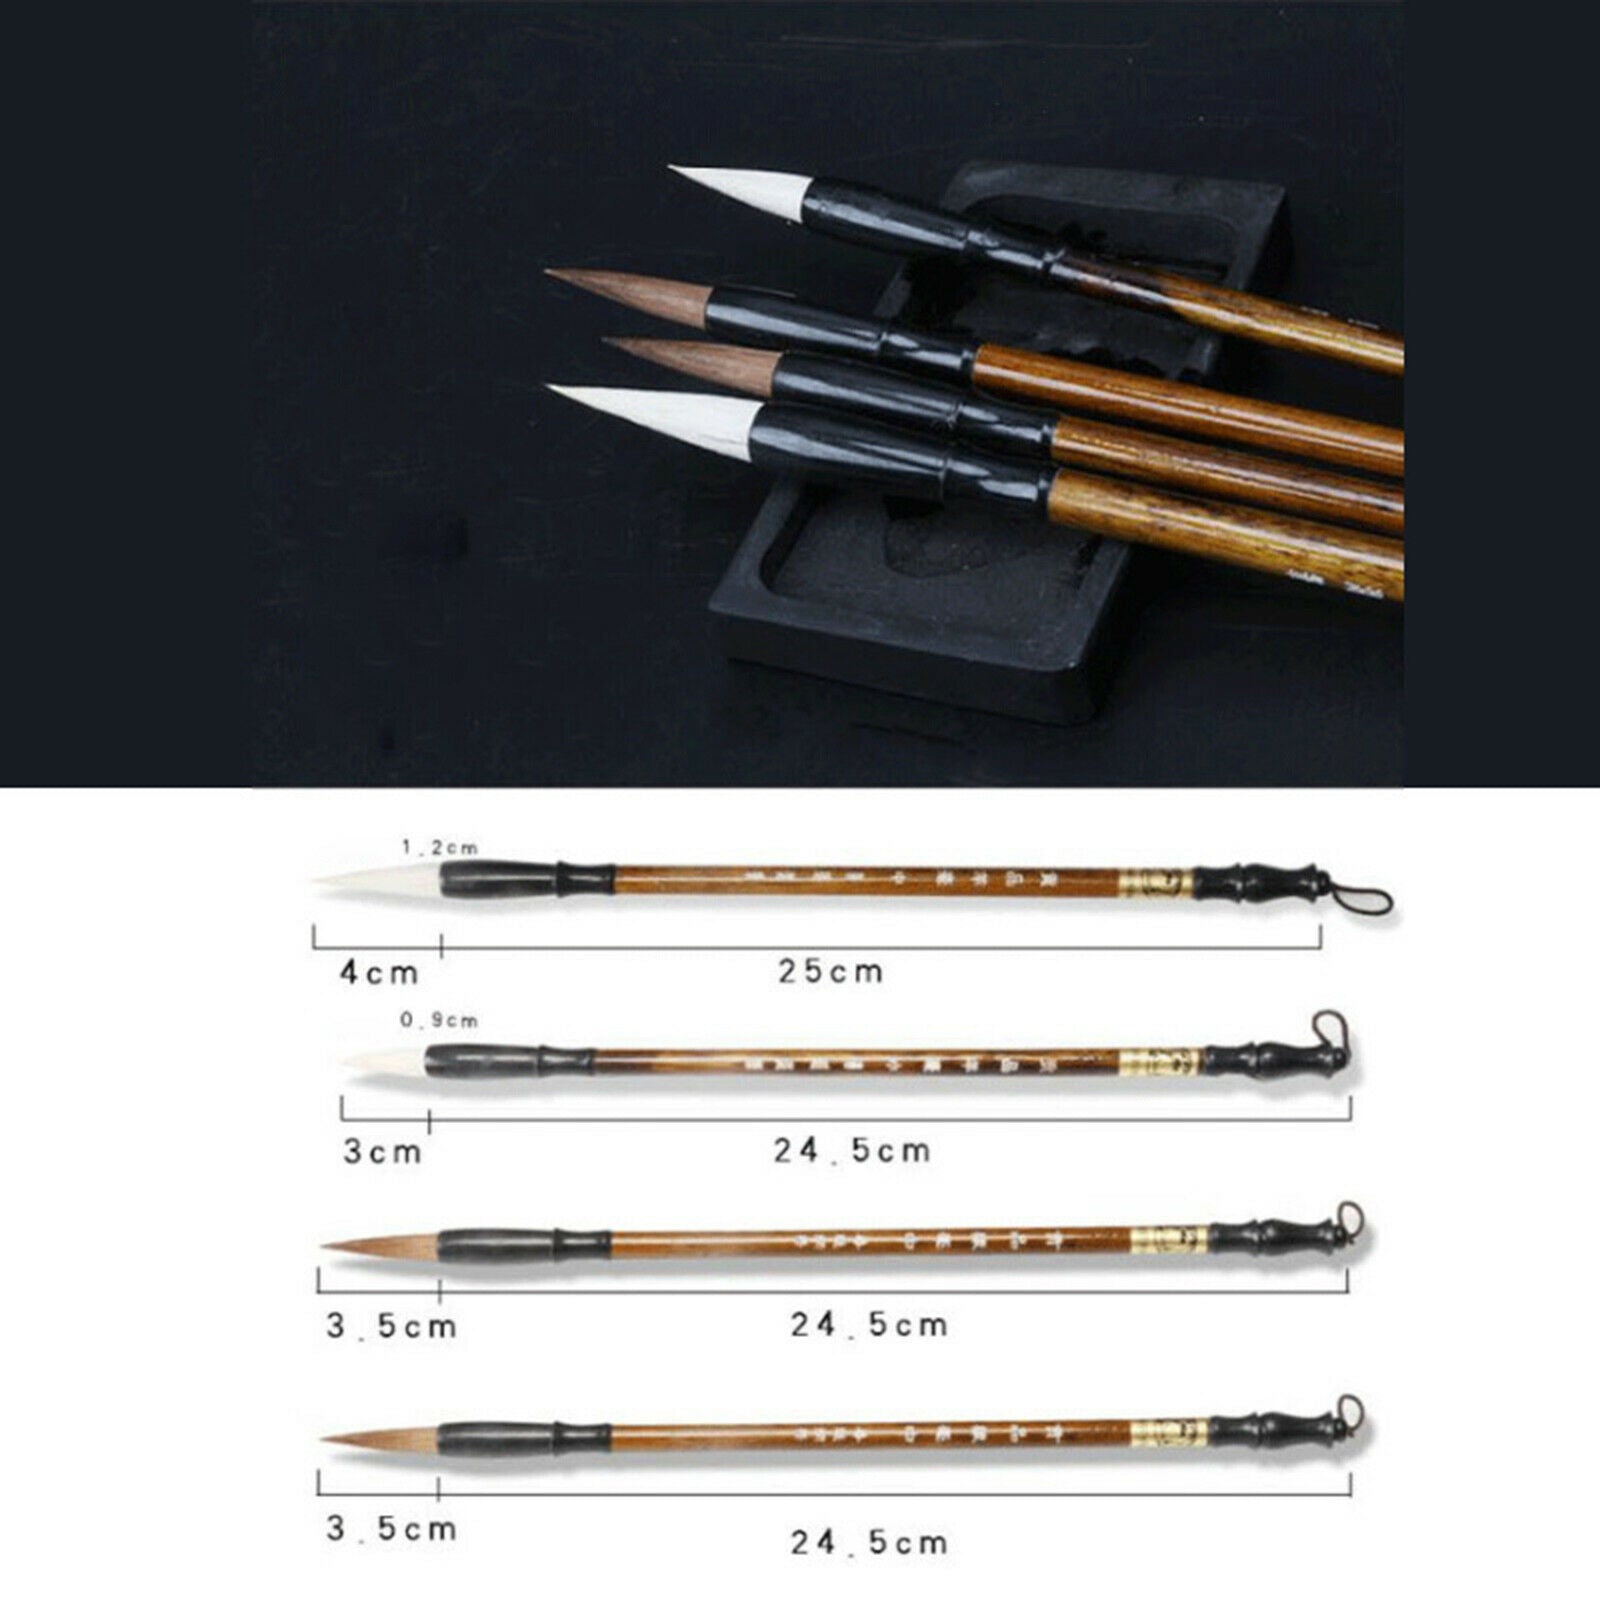 11 Pcs Traditional Chinese Calligraphy Painting Drawing Brushes Inkstone Kit